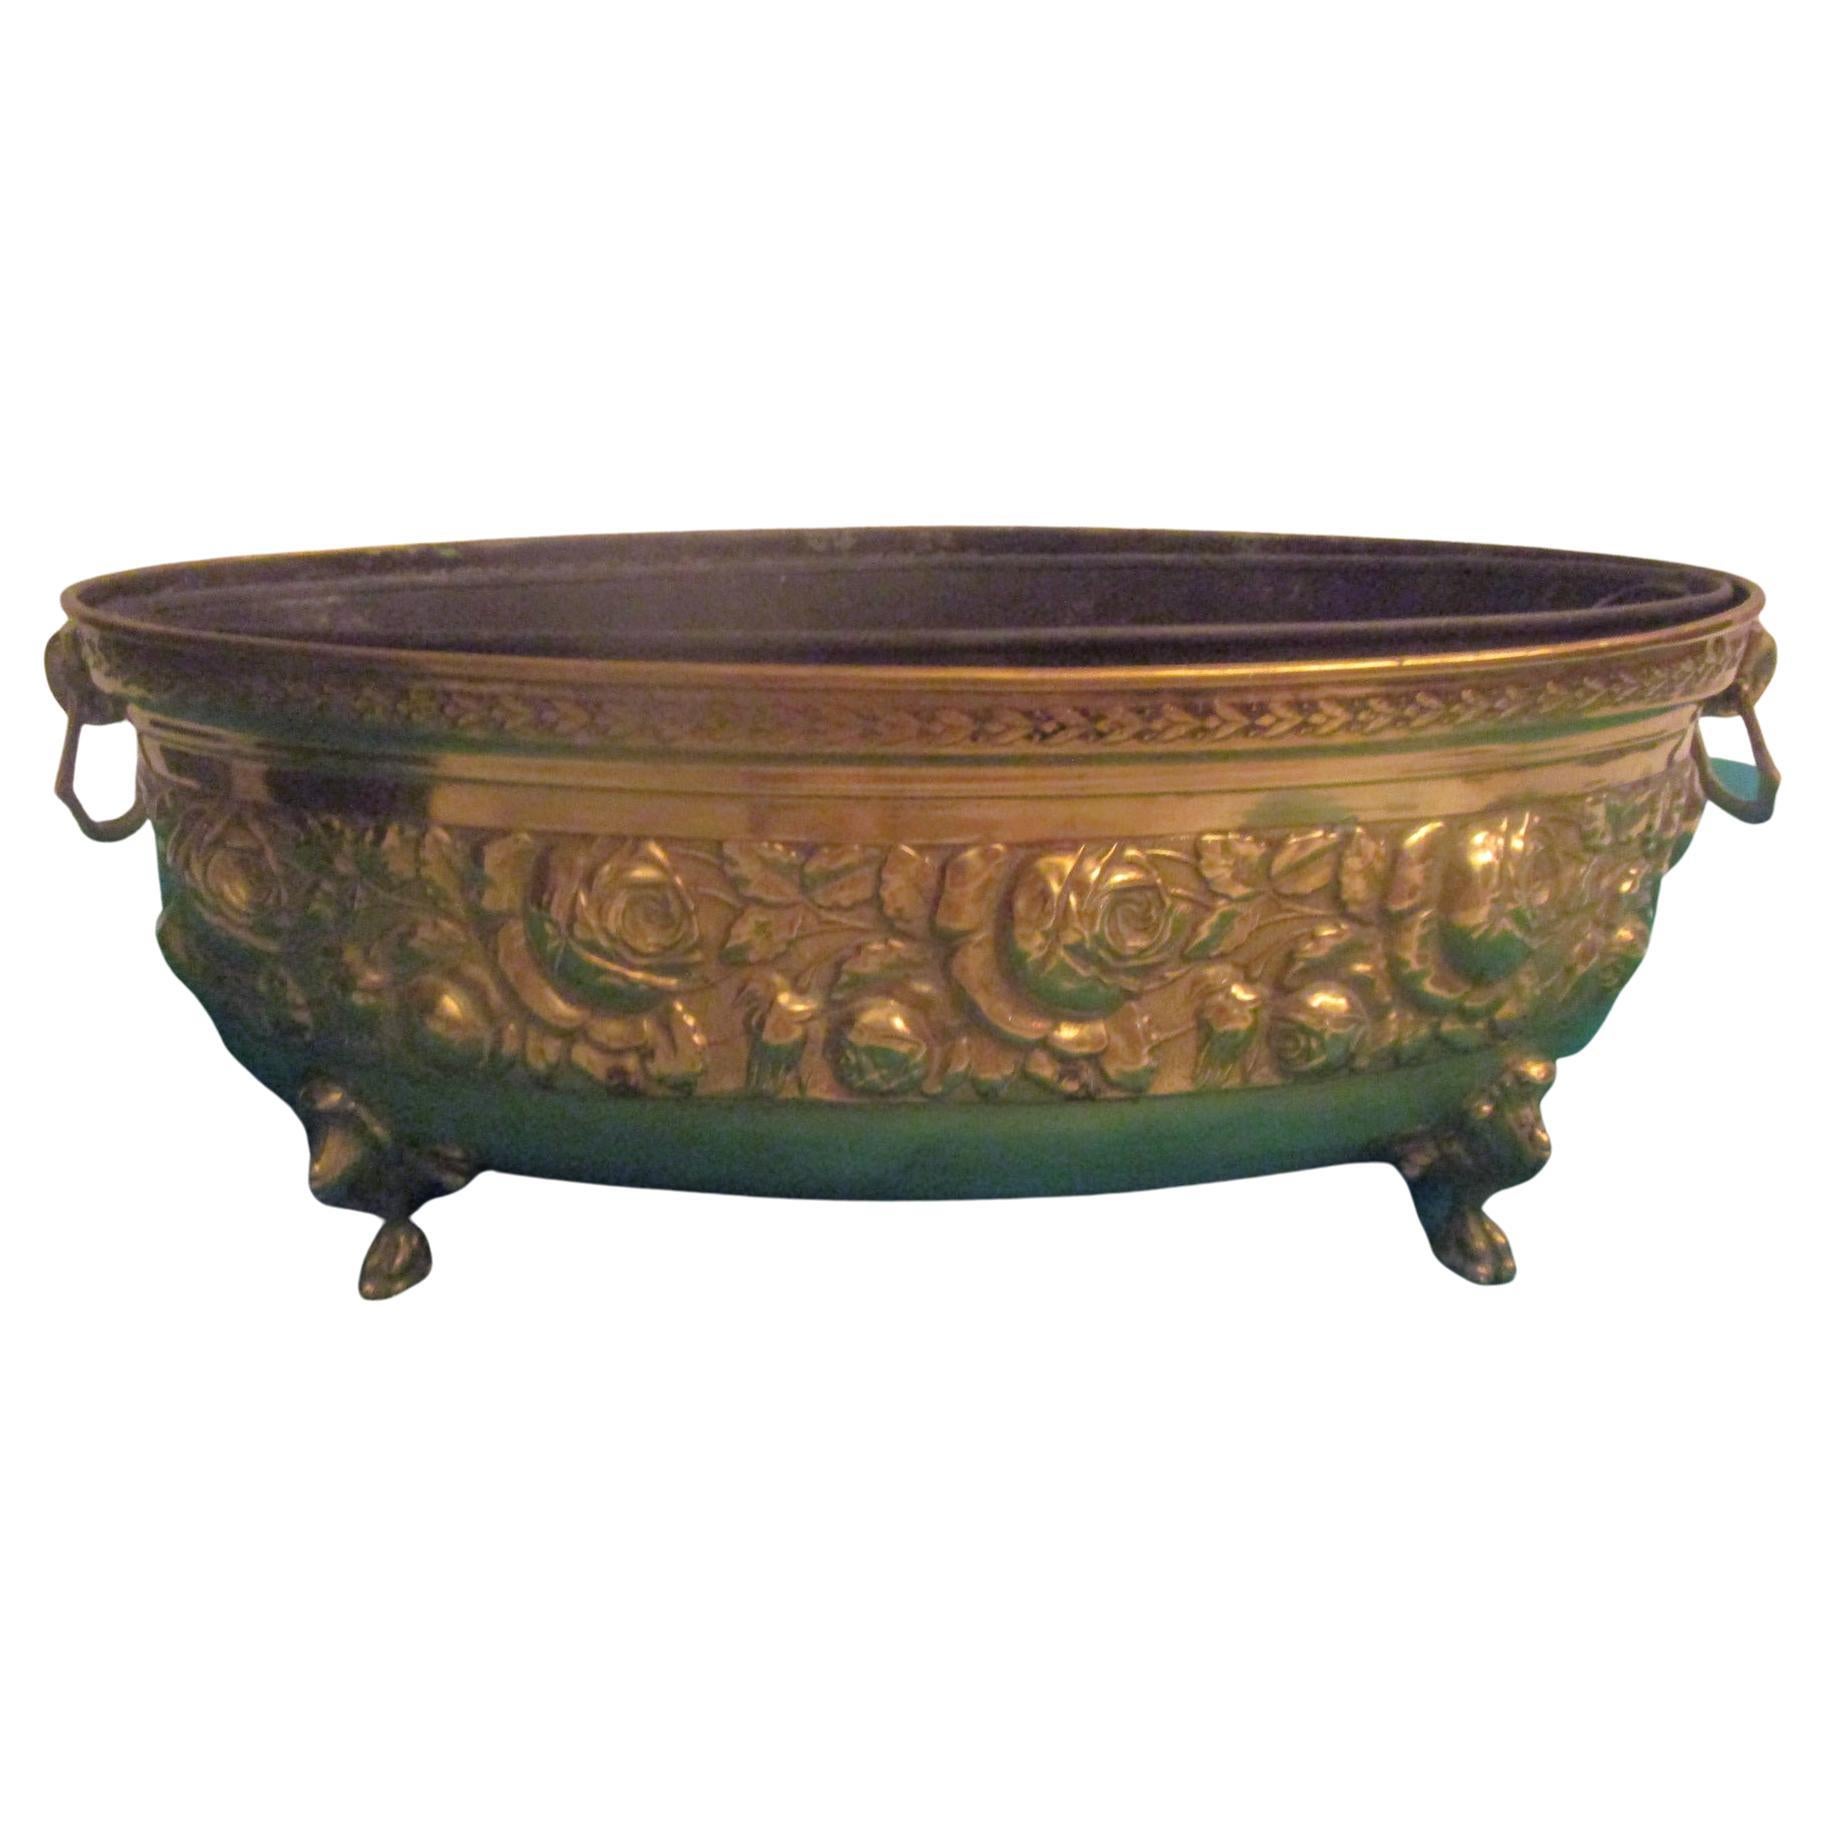 19th Century Brass Oval French Jardinière or Planter with Floral Motif